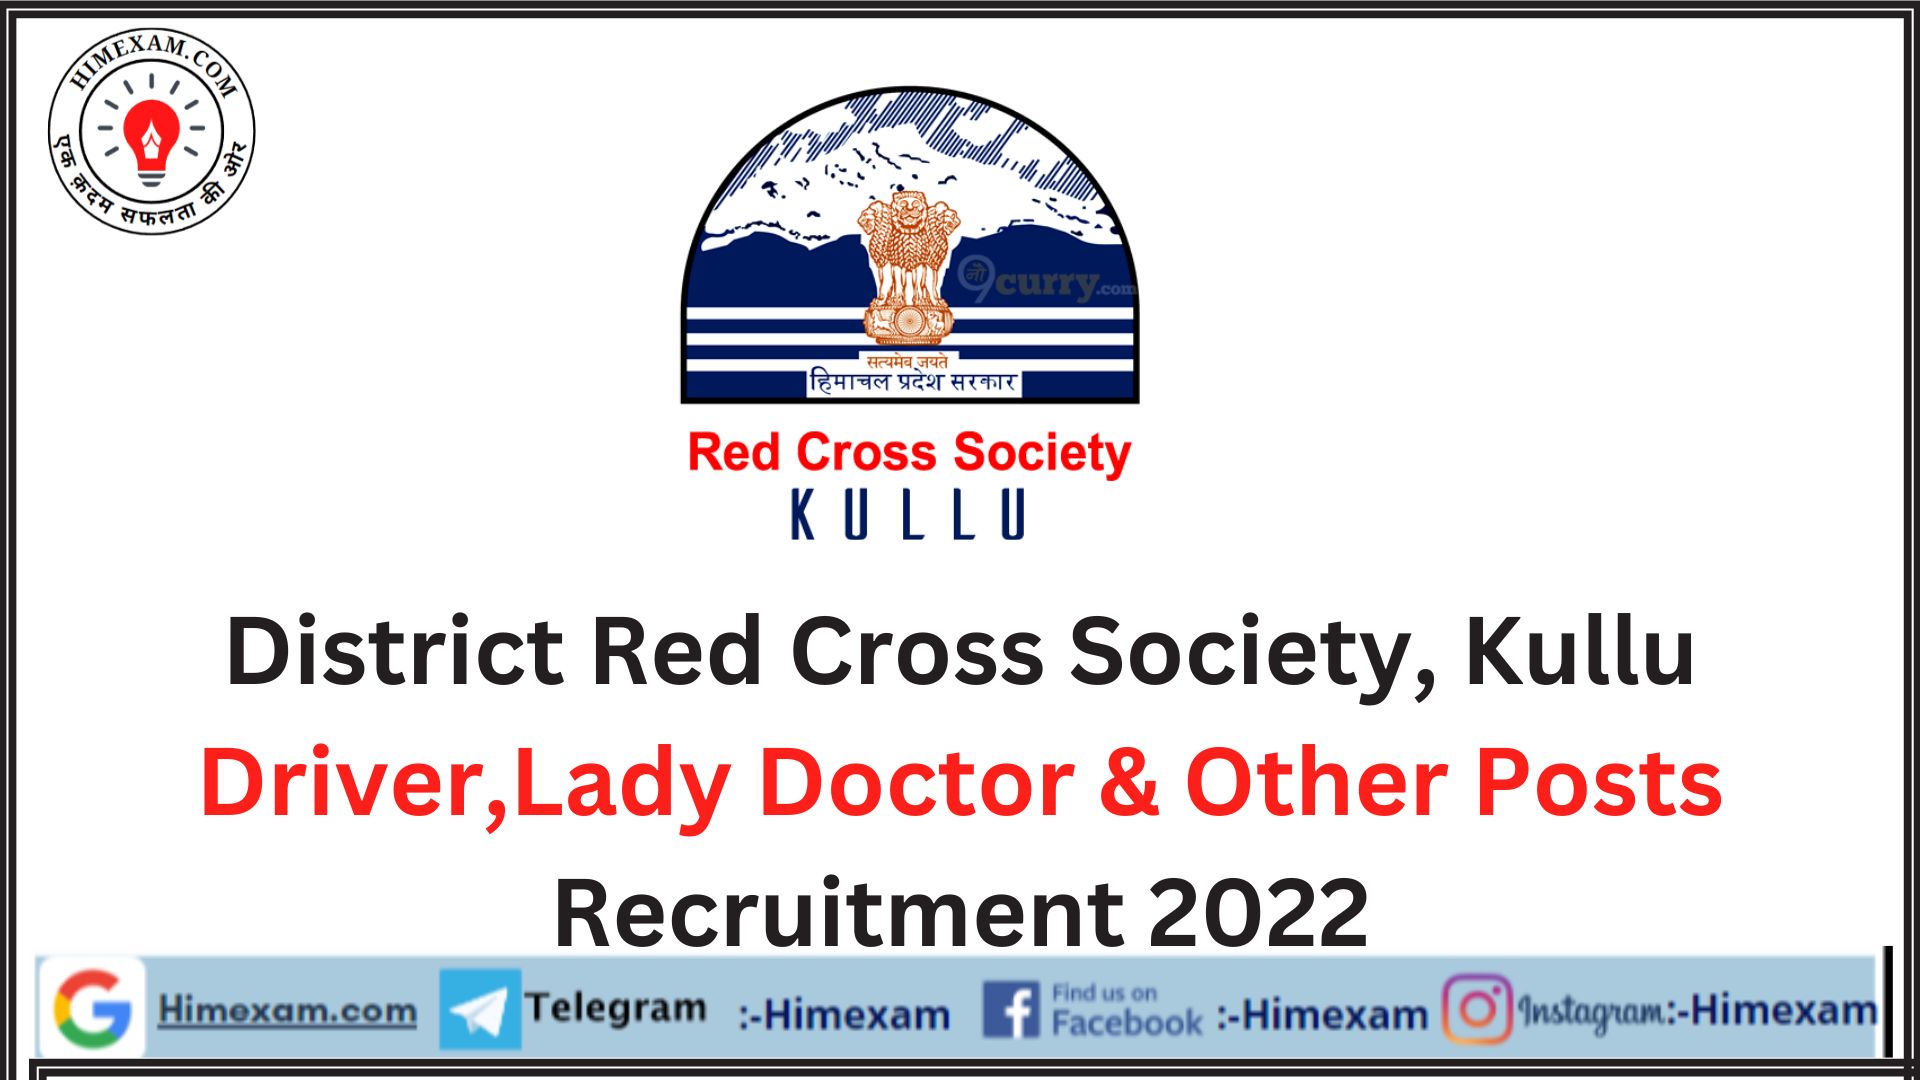 District Red Cross Society, Kullu Driver,Lady Doctor & Other Posts Recruitment 2022